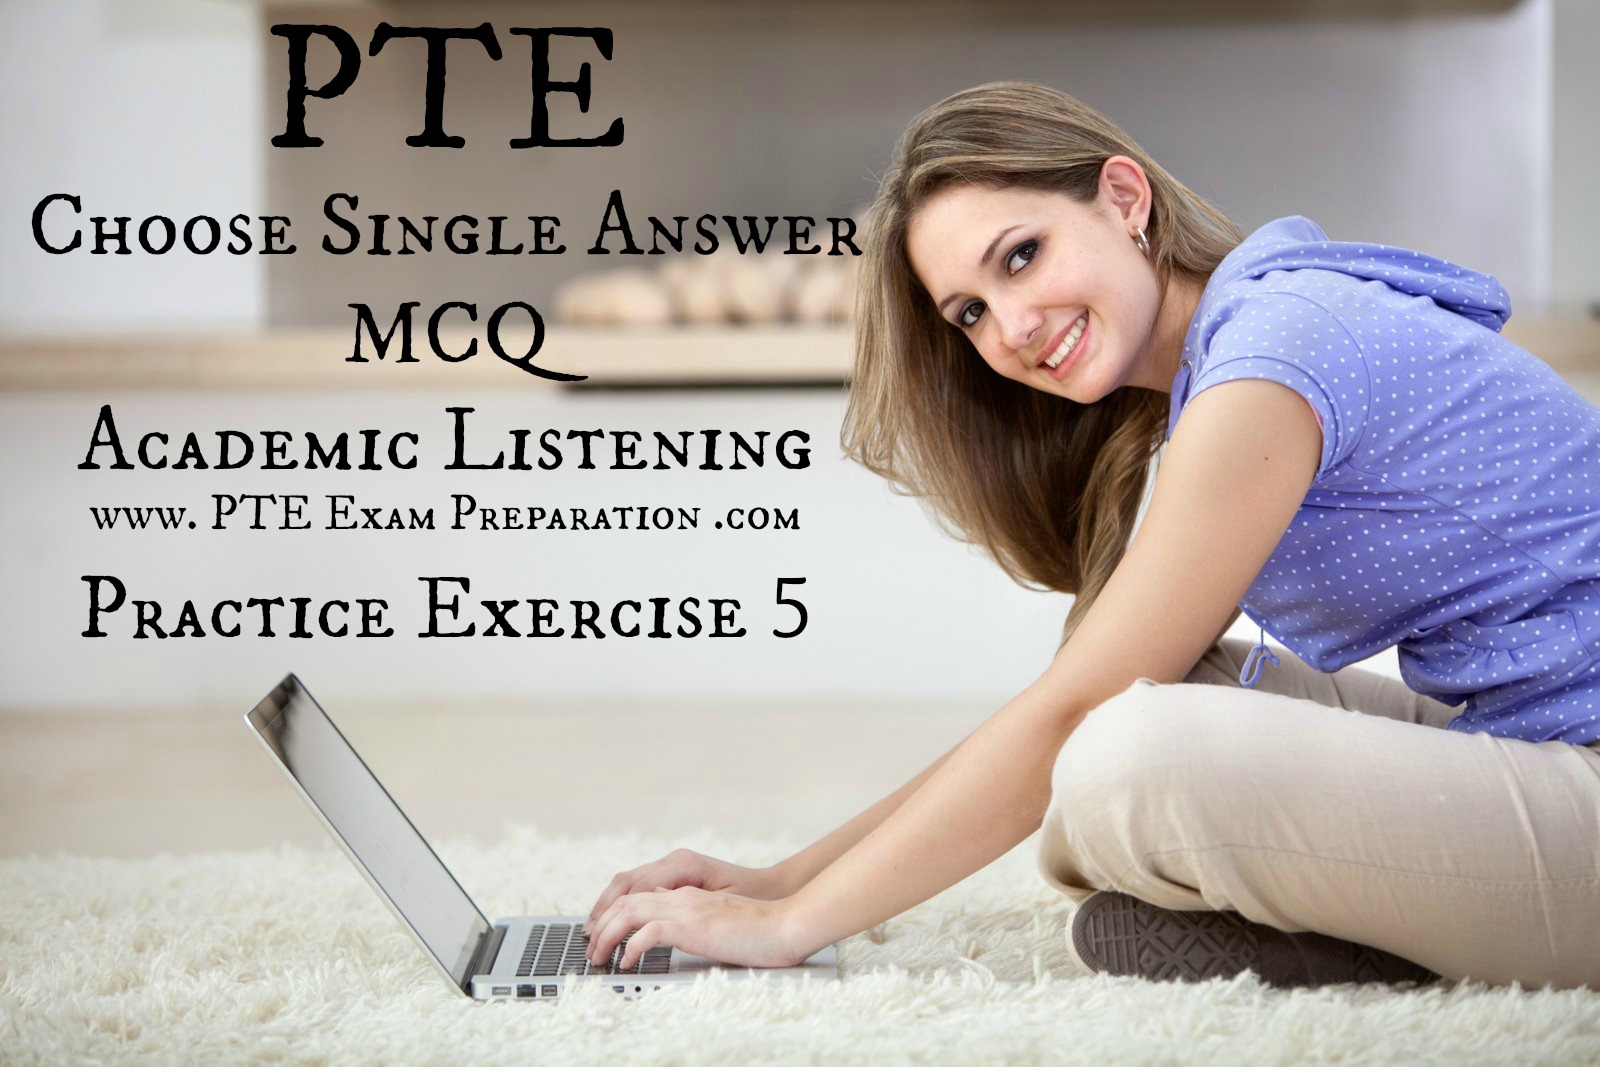 PTE Choose Single Answer MCQ Academic Listening Practice Exercise 5